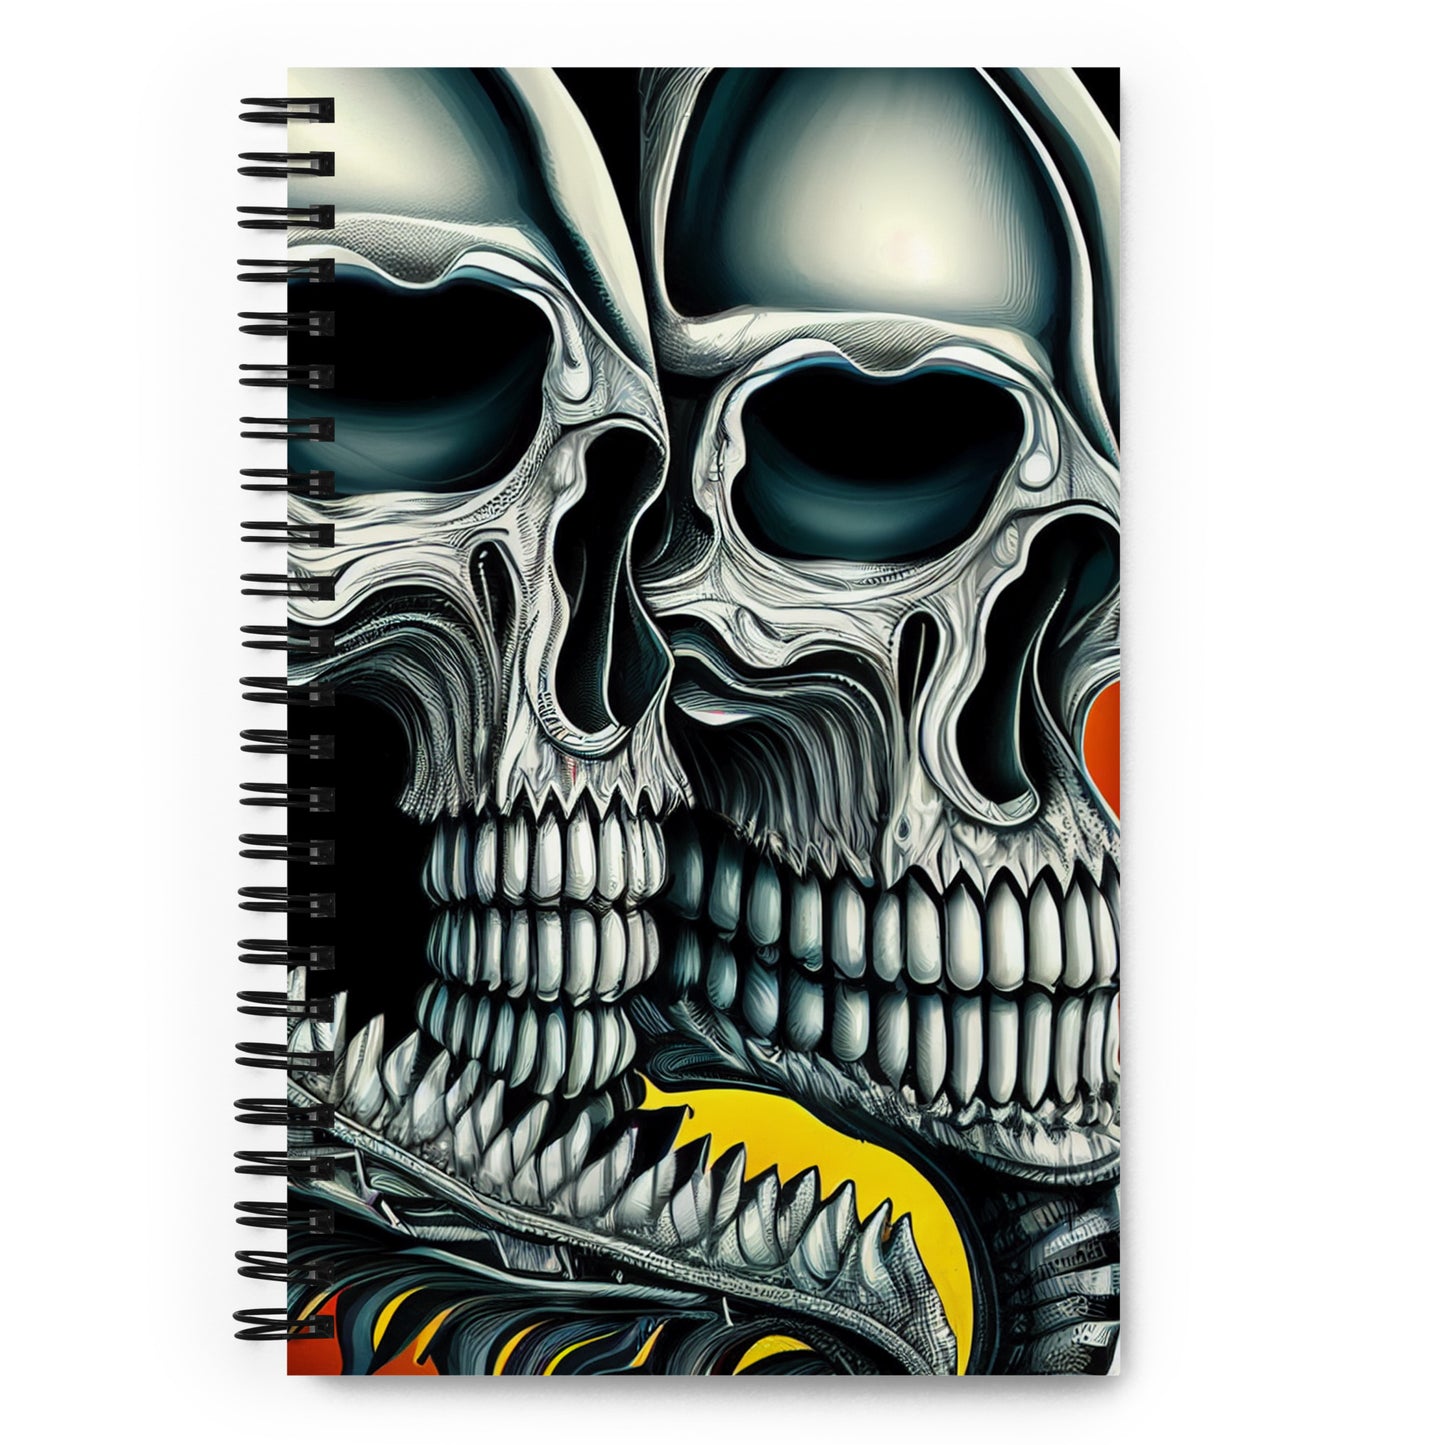 Double Skull Spiral notebook